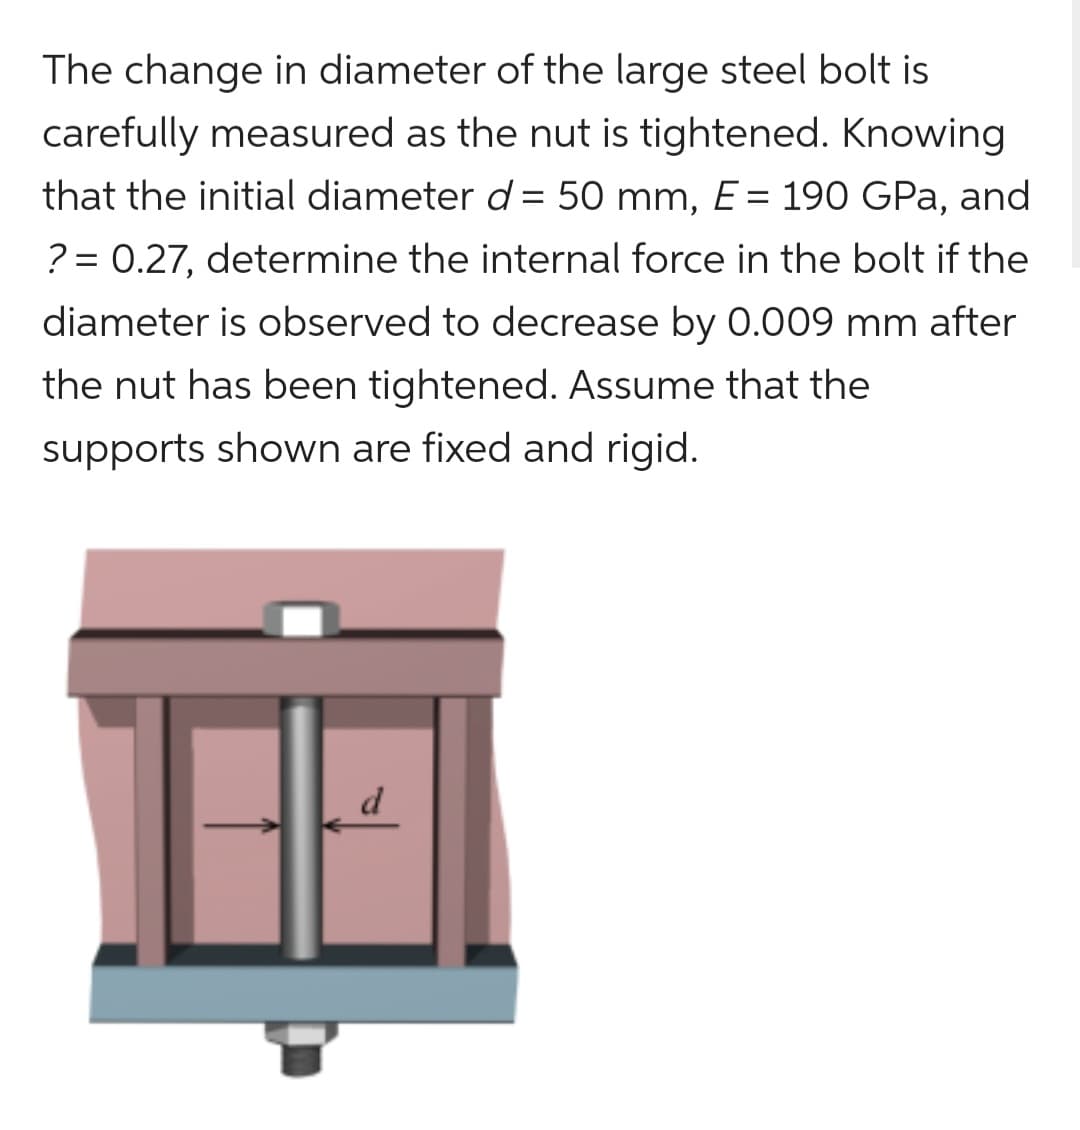 The change in diameter of the large steel bolt is
carefully measured as the nut is tightened. Knowing
that the initial diameter d = 50 mm, E = 190 GPa, and
? = 0.27, determine the internal force in the bolt if the
diameter is observed to decrease by 0.009 mm after
the nut has been tightened. Assume that the
supports shown are fixed and rigid.
d